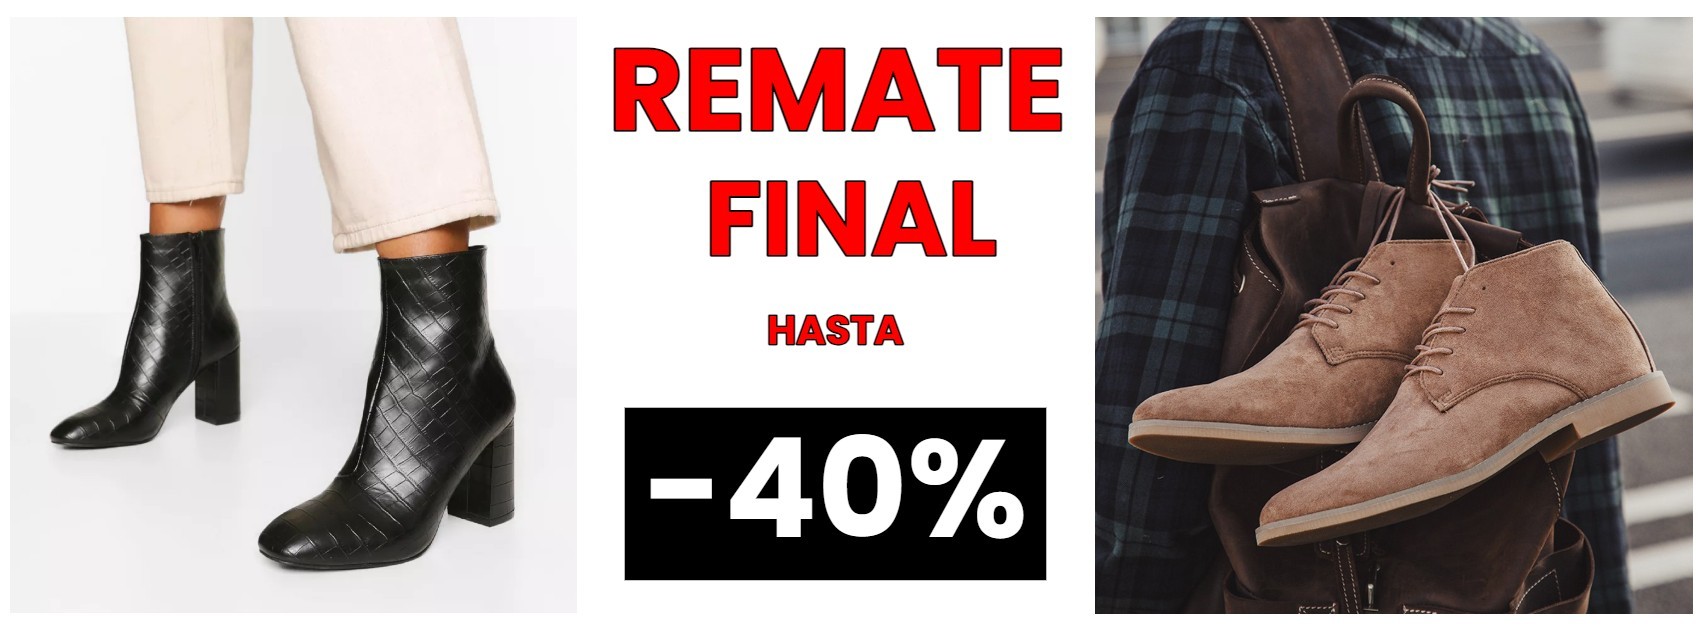 Remate Final